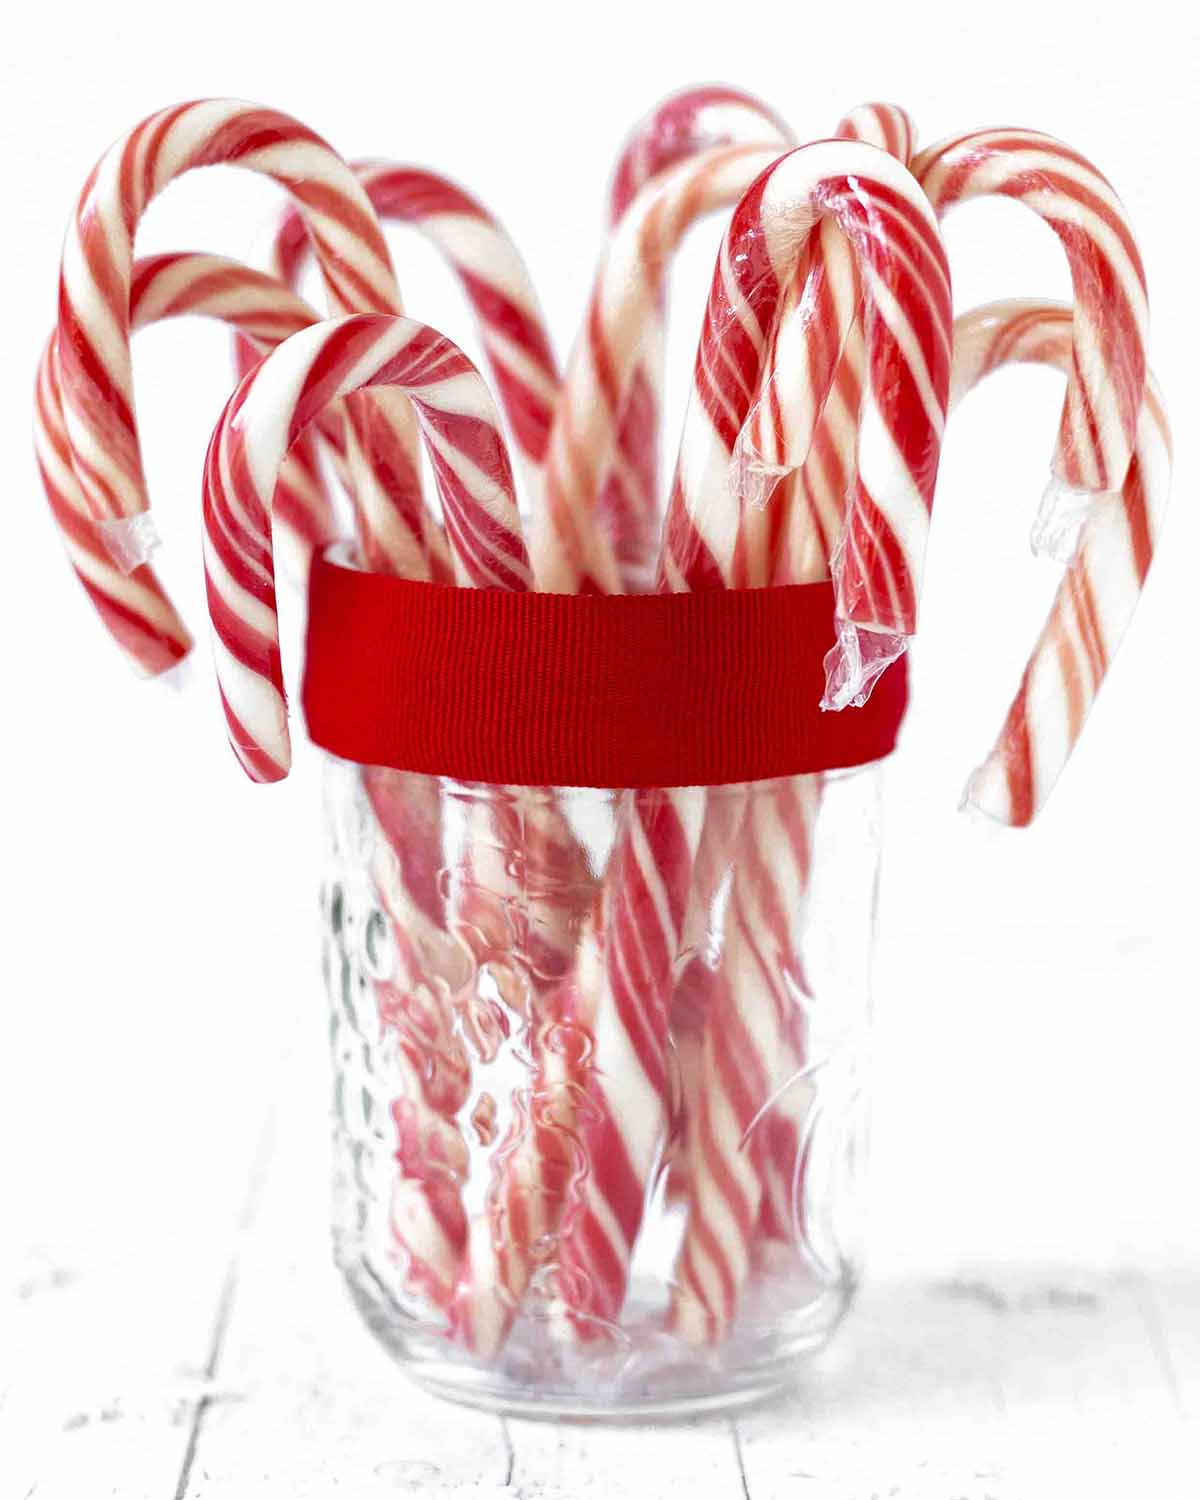 A glass mason jar with candy canes inside of it.